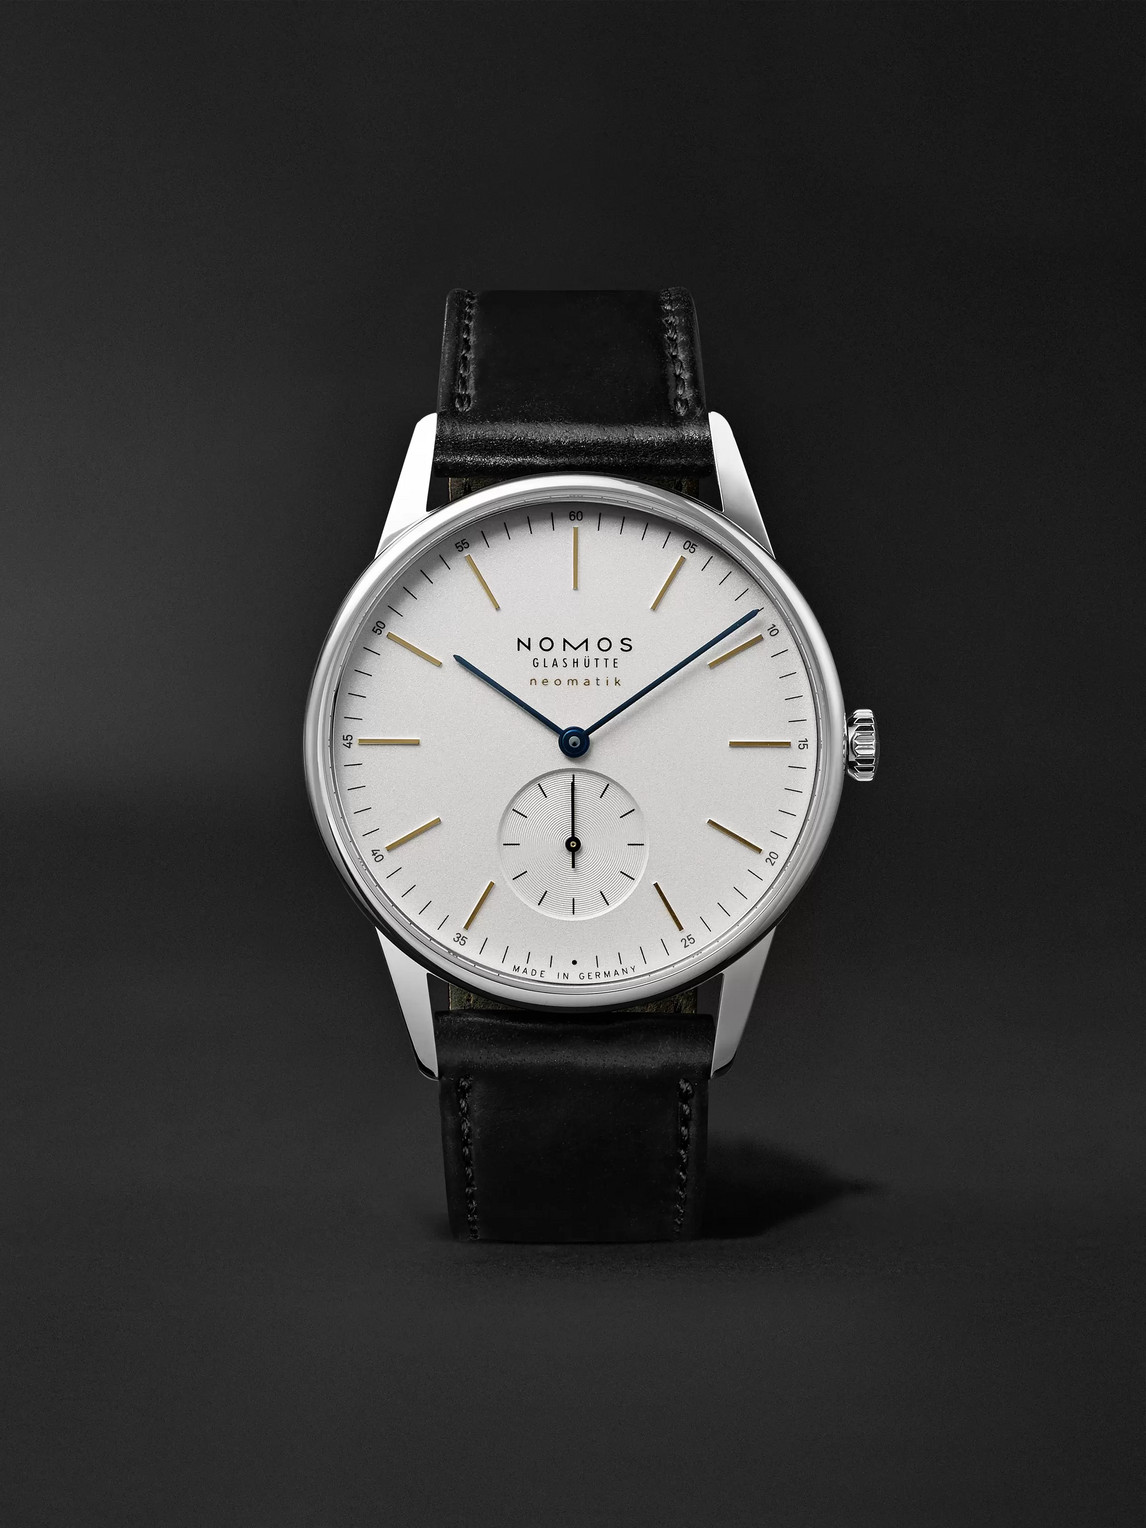 Nomos Glashütte At Work Orion Neomatik Automatic 39mm Stainless Steel And Leather Watch, Ref. No. 340 In White